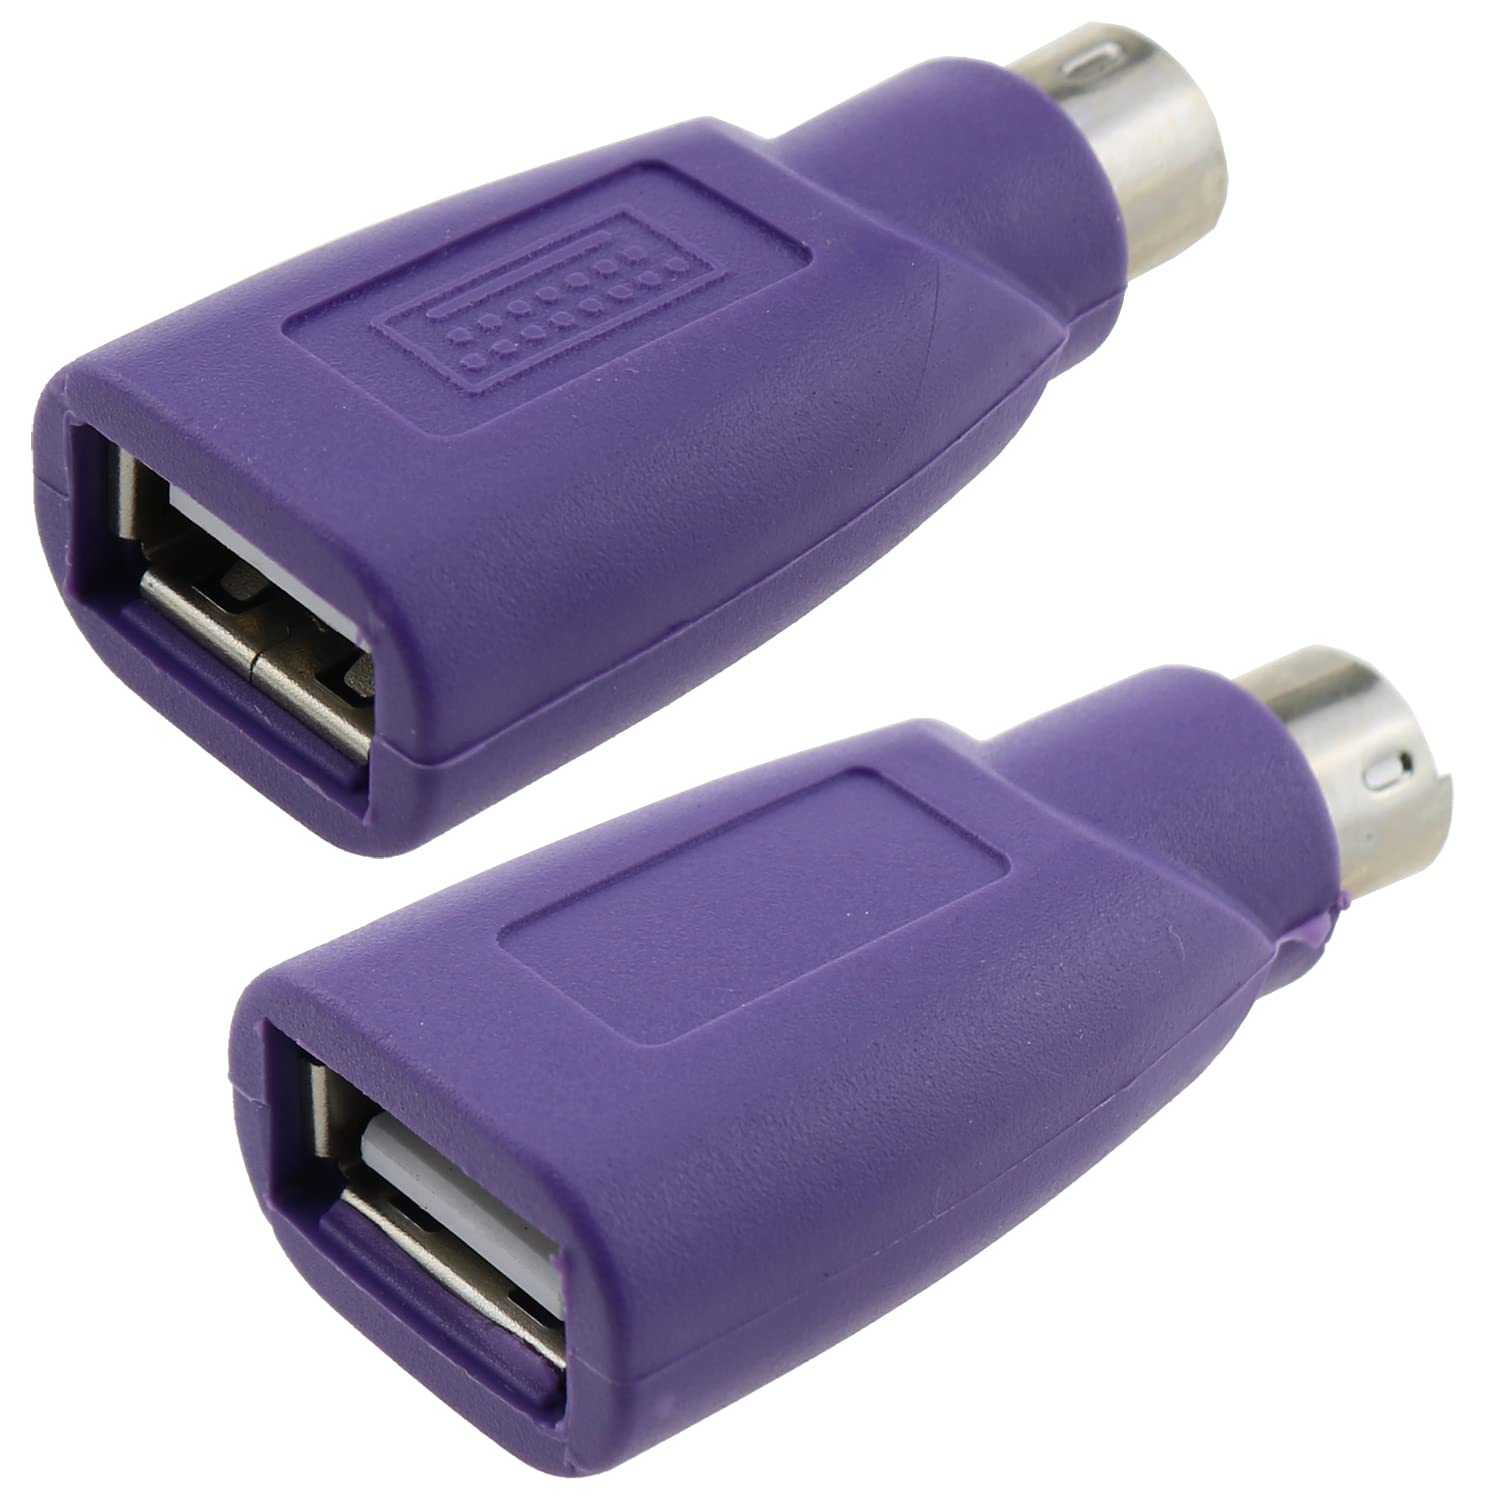 E-outstanding USB to PS2 Adapter, 2PCS USB Female to PS/2 Male Converter Adapter for Mouse Keyboard, Purple